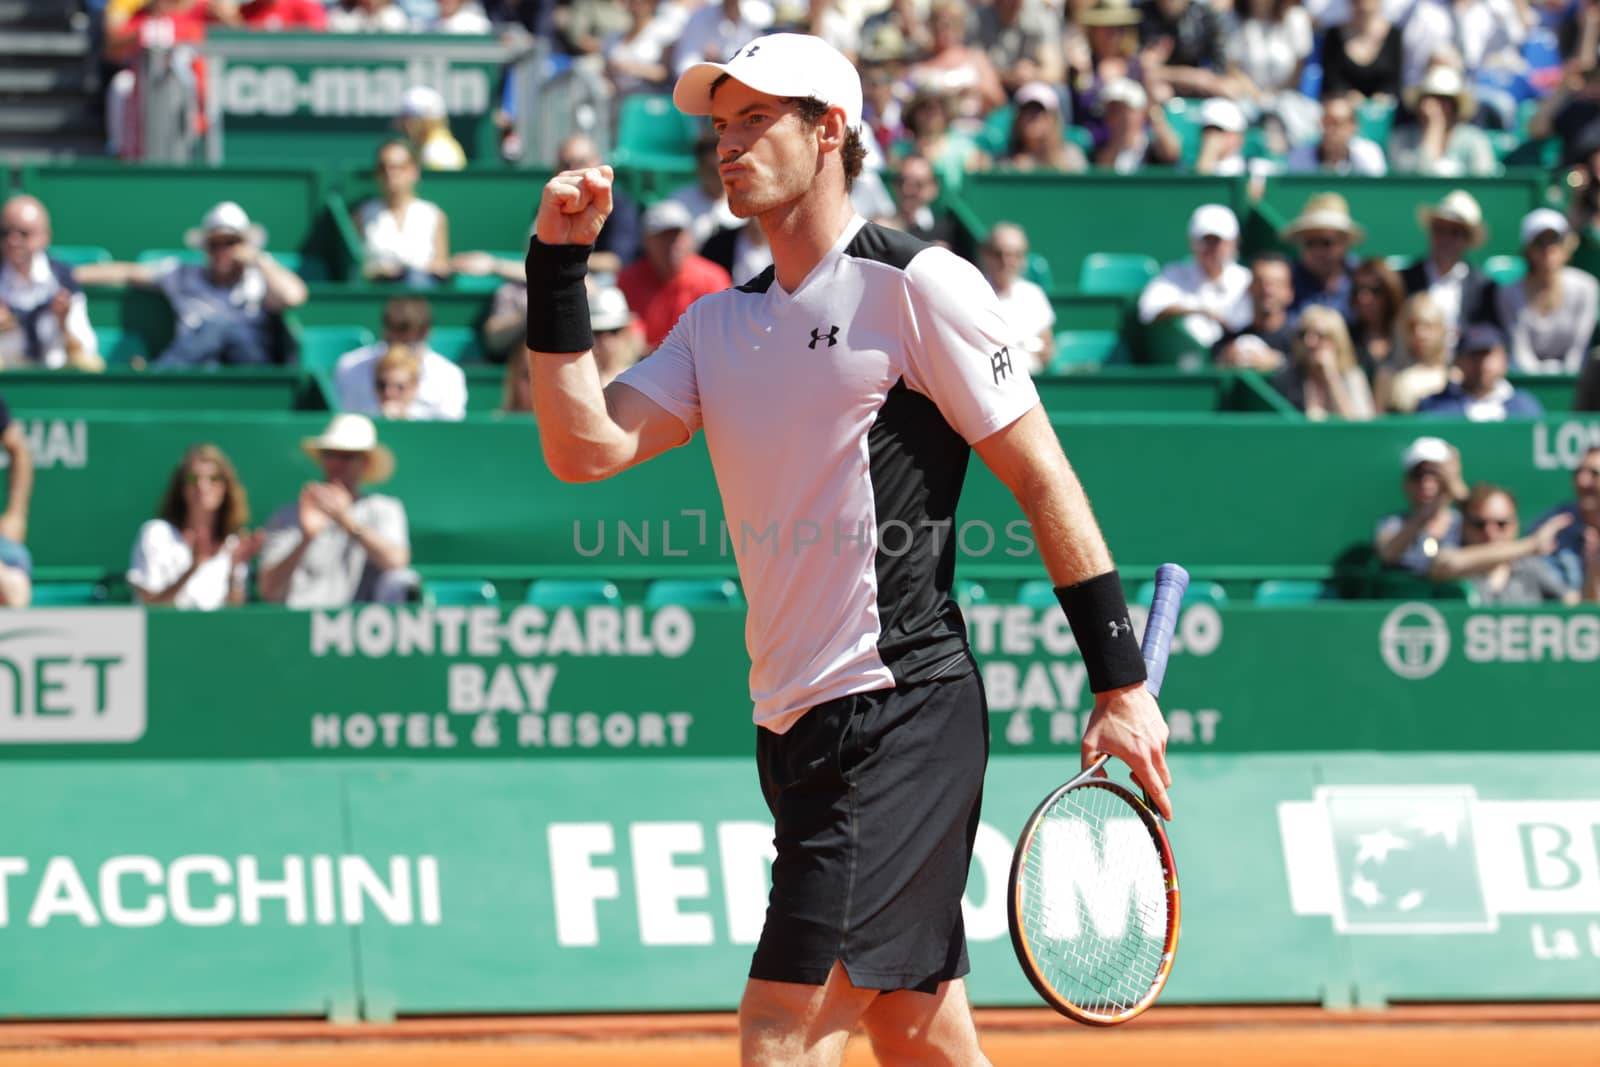 MONACO, Monte-Carlo: Britain's Andy Murray raises his fist in sign of victory during his  tennis match with Canada's Milos Raonic at the Monte-Carlo ATP Masters Series tournament on April 15, 2016 in Monaco. Britain's Andy Murray is through to the Monte Carlo Masters semi-finals following an impressive win over Canadian Milos Raonic.